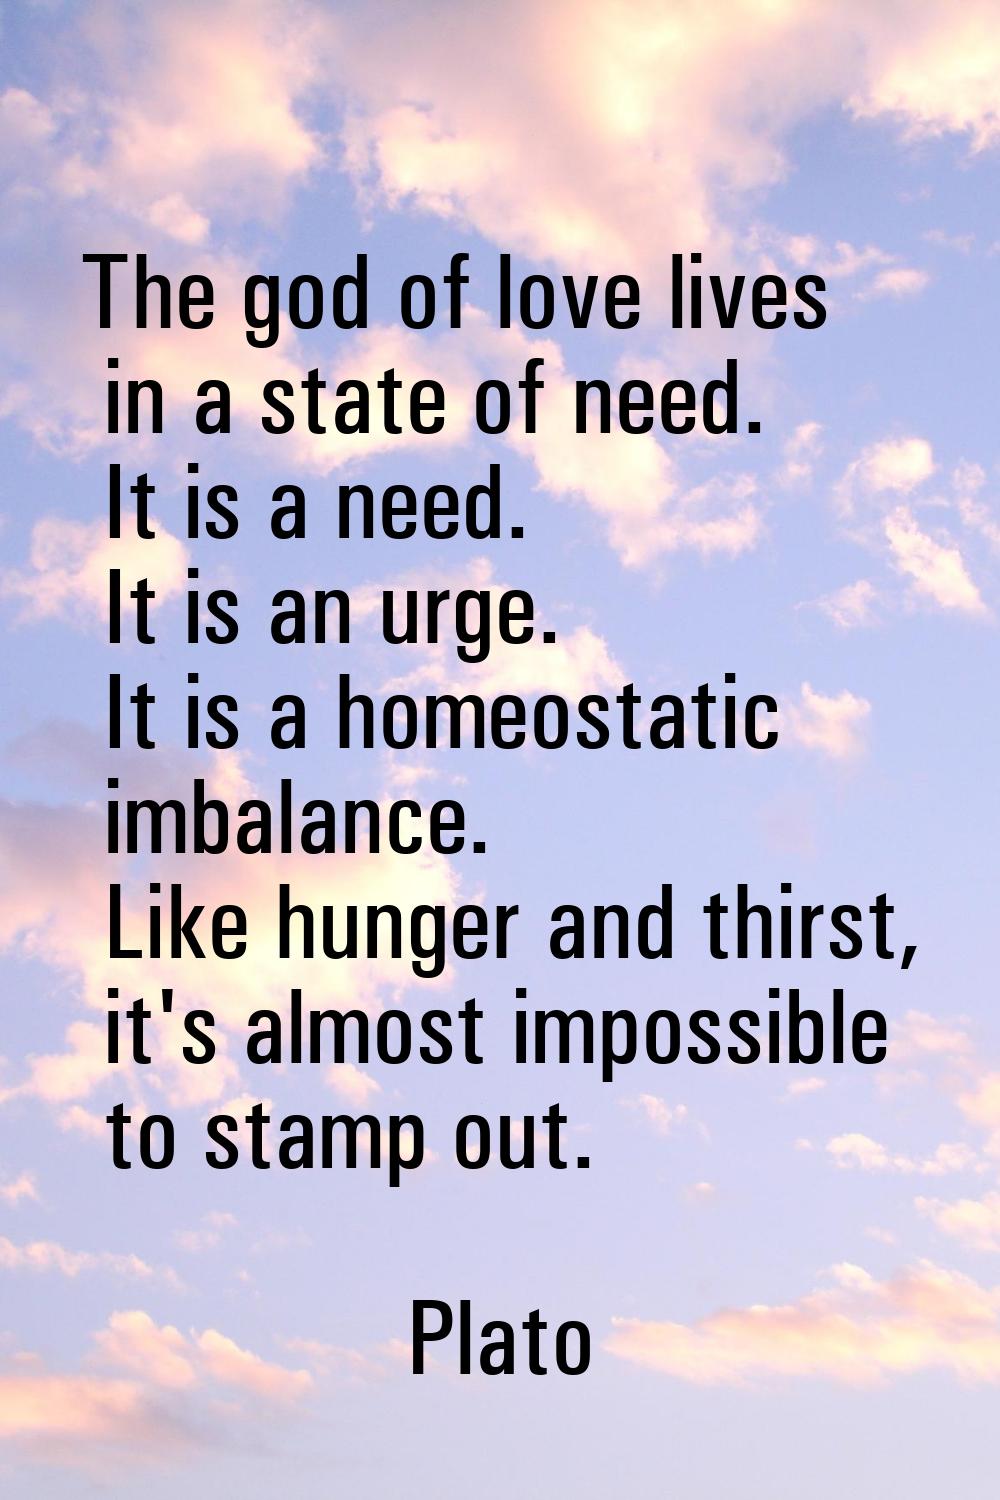 The god of love lives in a state of need. It is a need. It is an urge. It is a homeostatic imbalanc